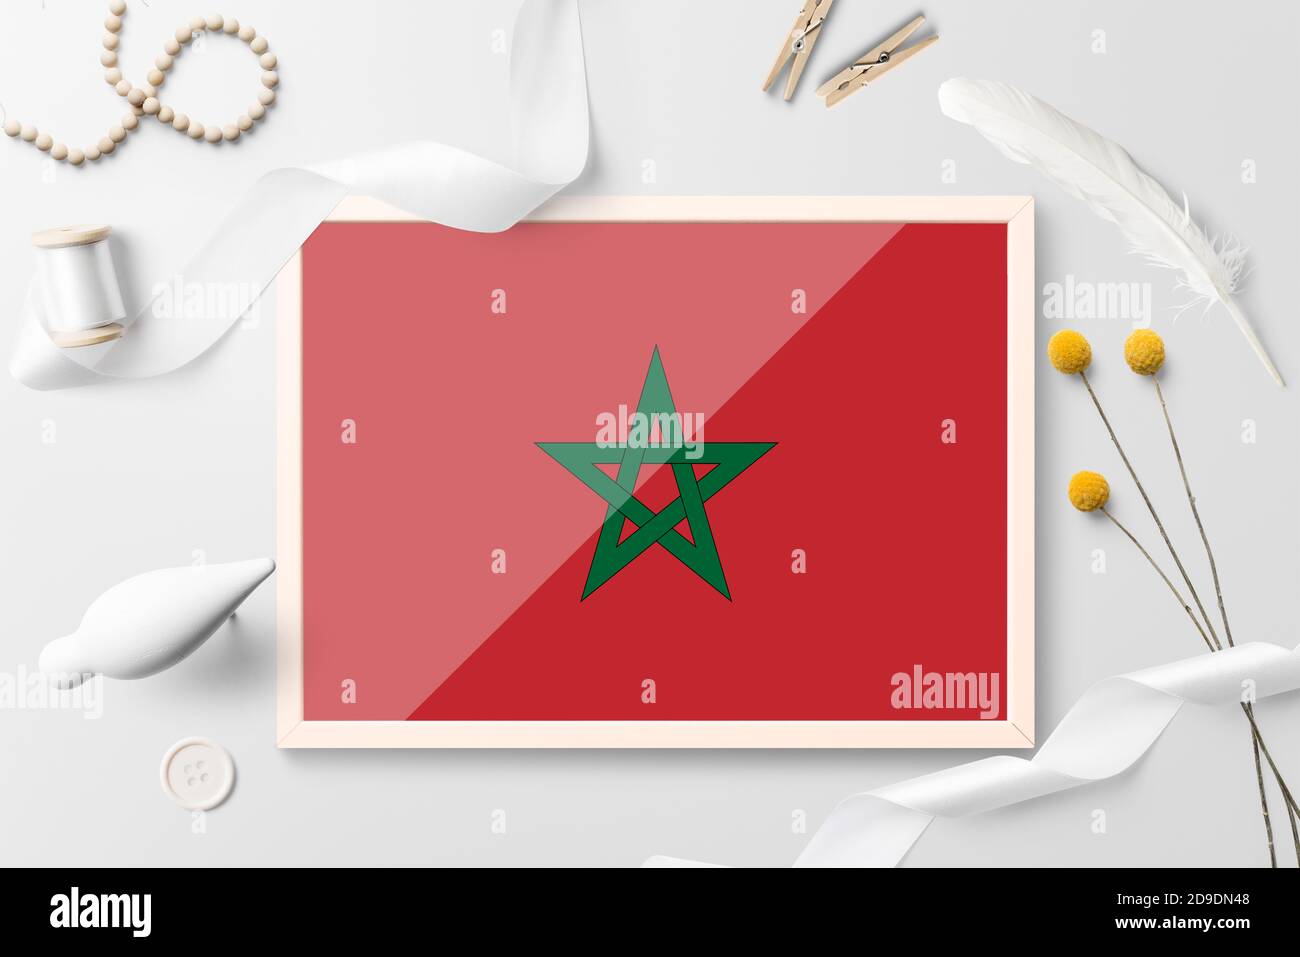 Morocco flag in wooden frame on white creative background. White theme, feather, daisy, button, ribbon objects. Stock Photo